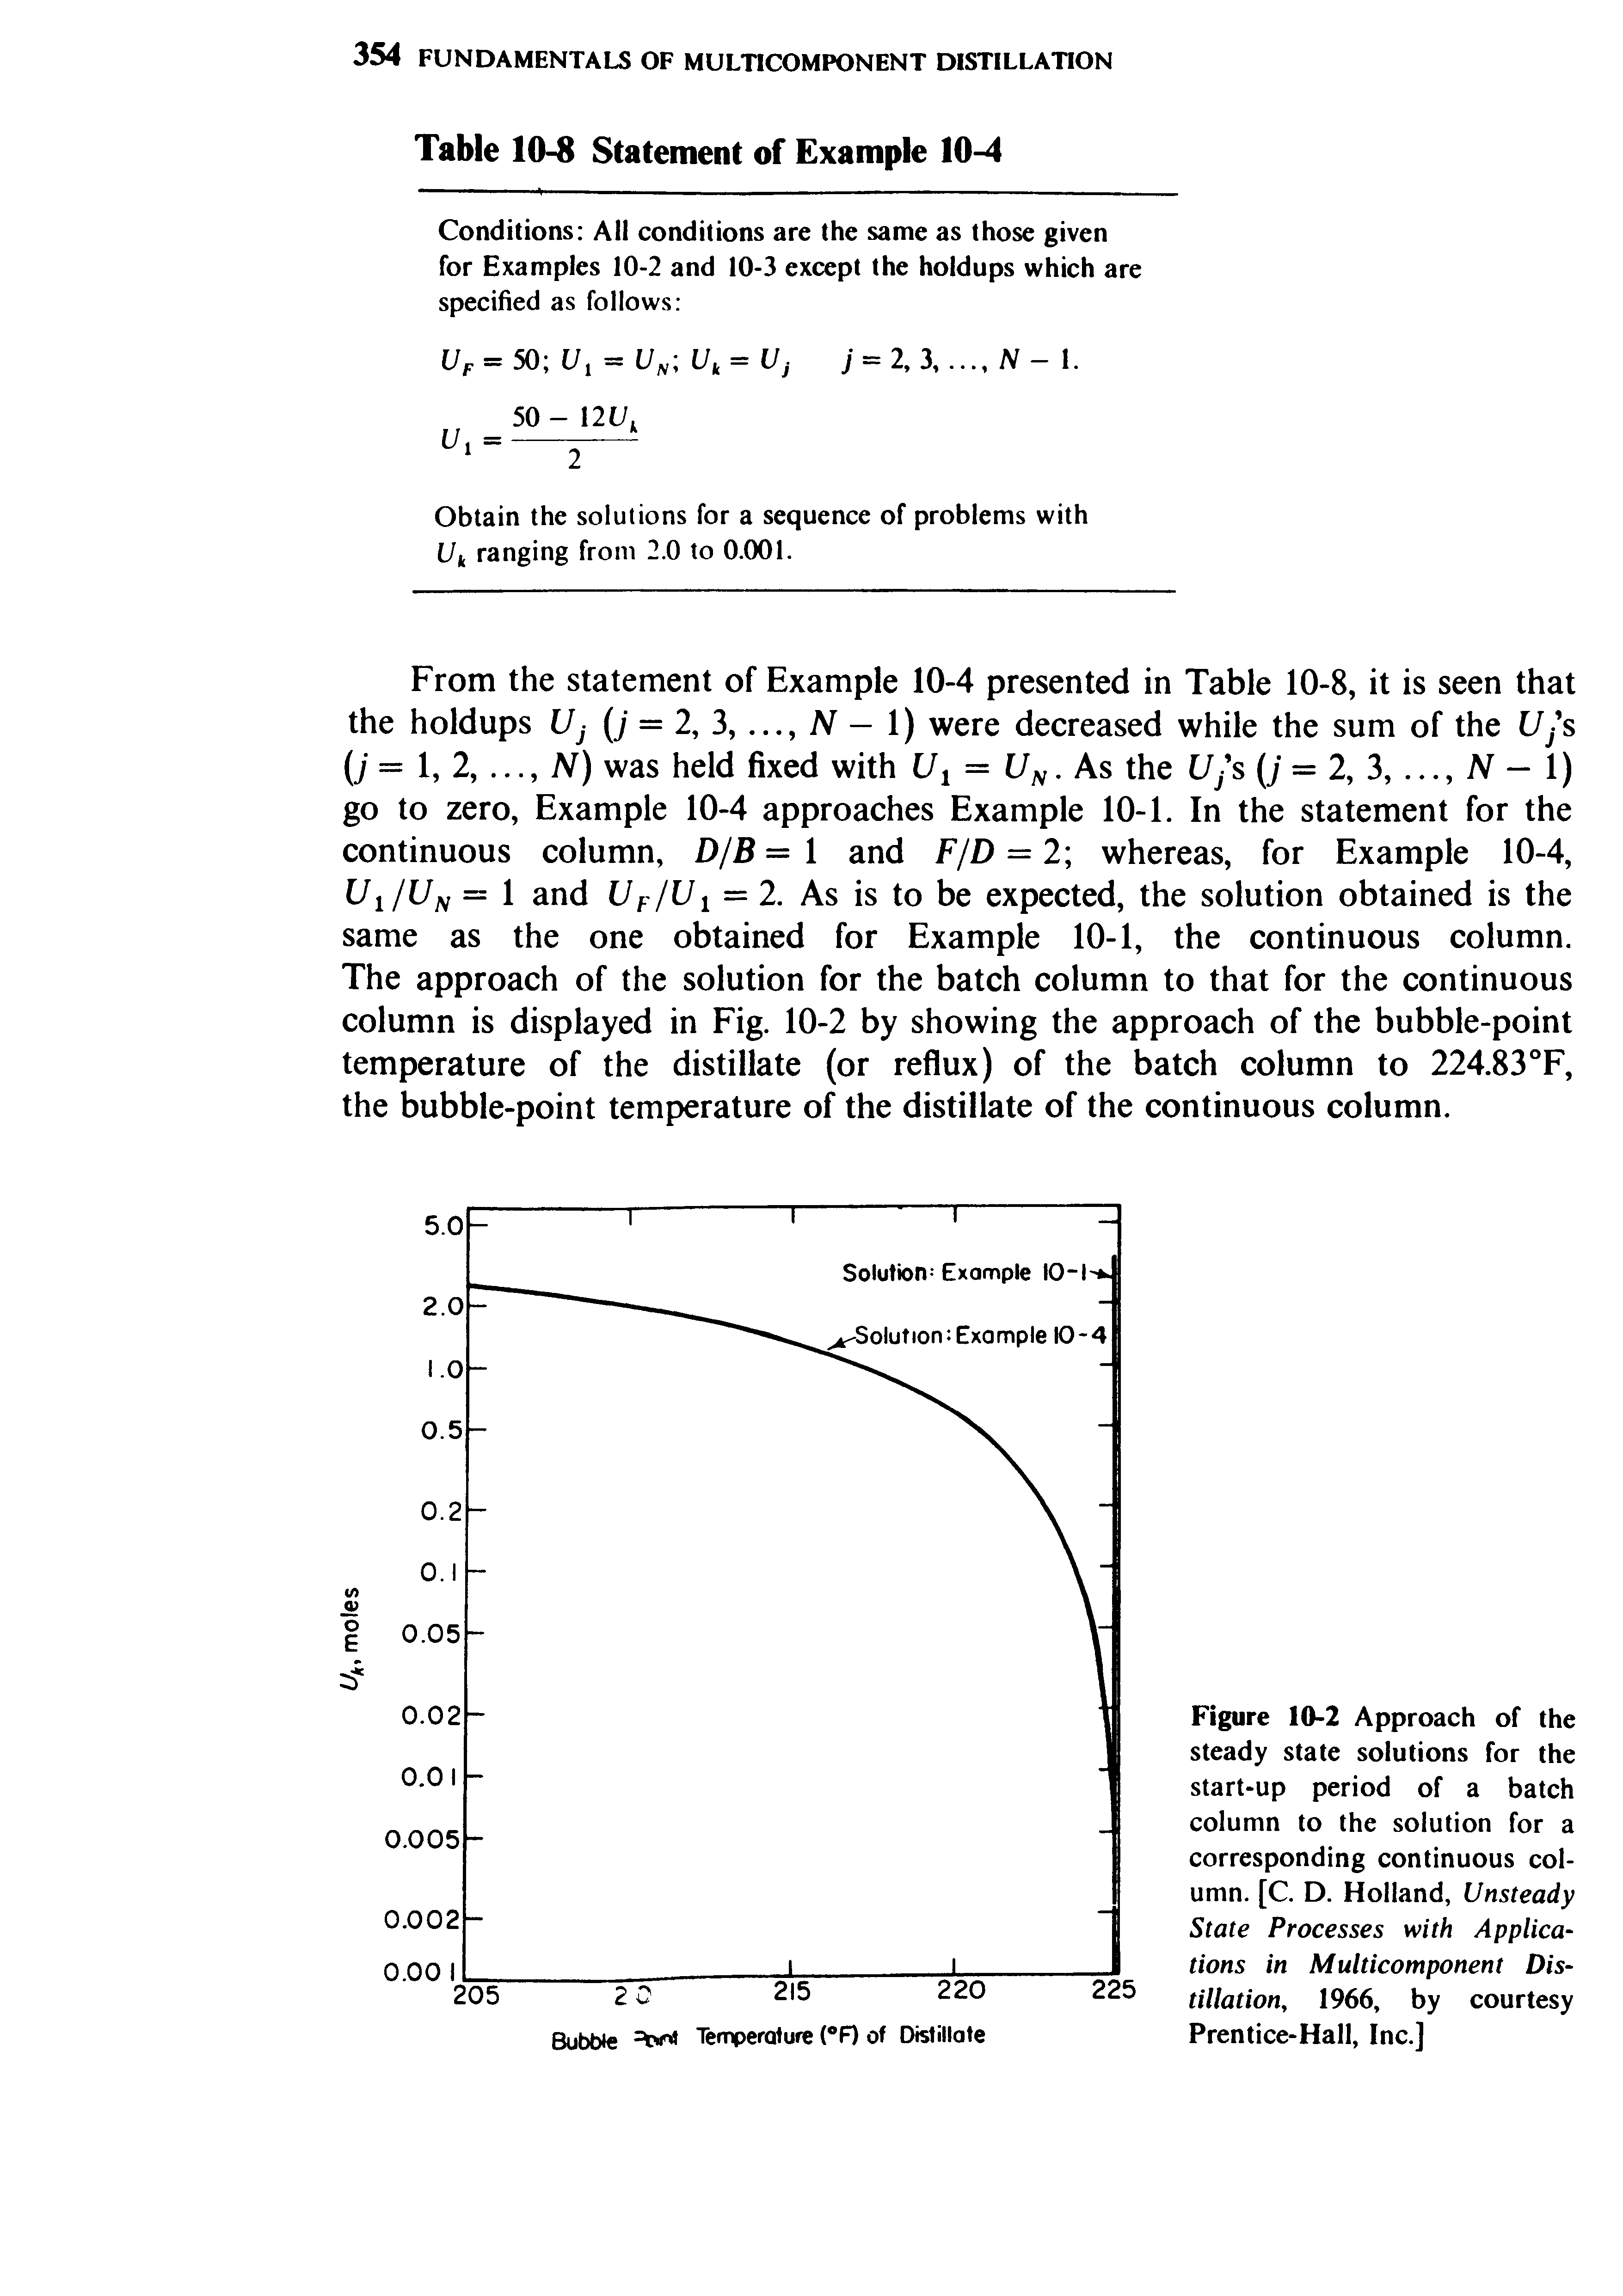 Figure 10-2 Approach of the steady state solutions for the start-up period of a batch column to the solution for a corresponding continuous column. [C. D. Holland, Unsteady State Processes with Applications in Multicomponent Distillation, 1966, by courtesy Prentice-Hall, Inc.]...